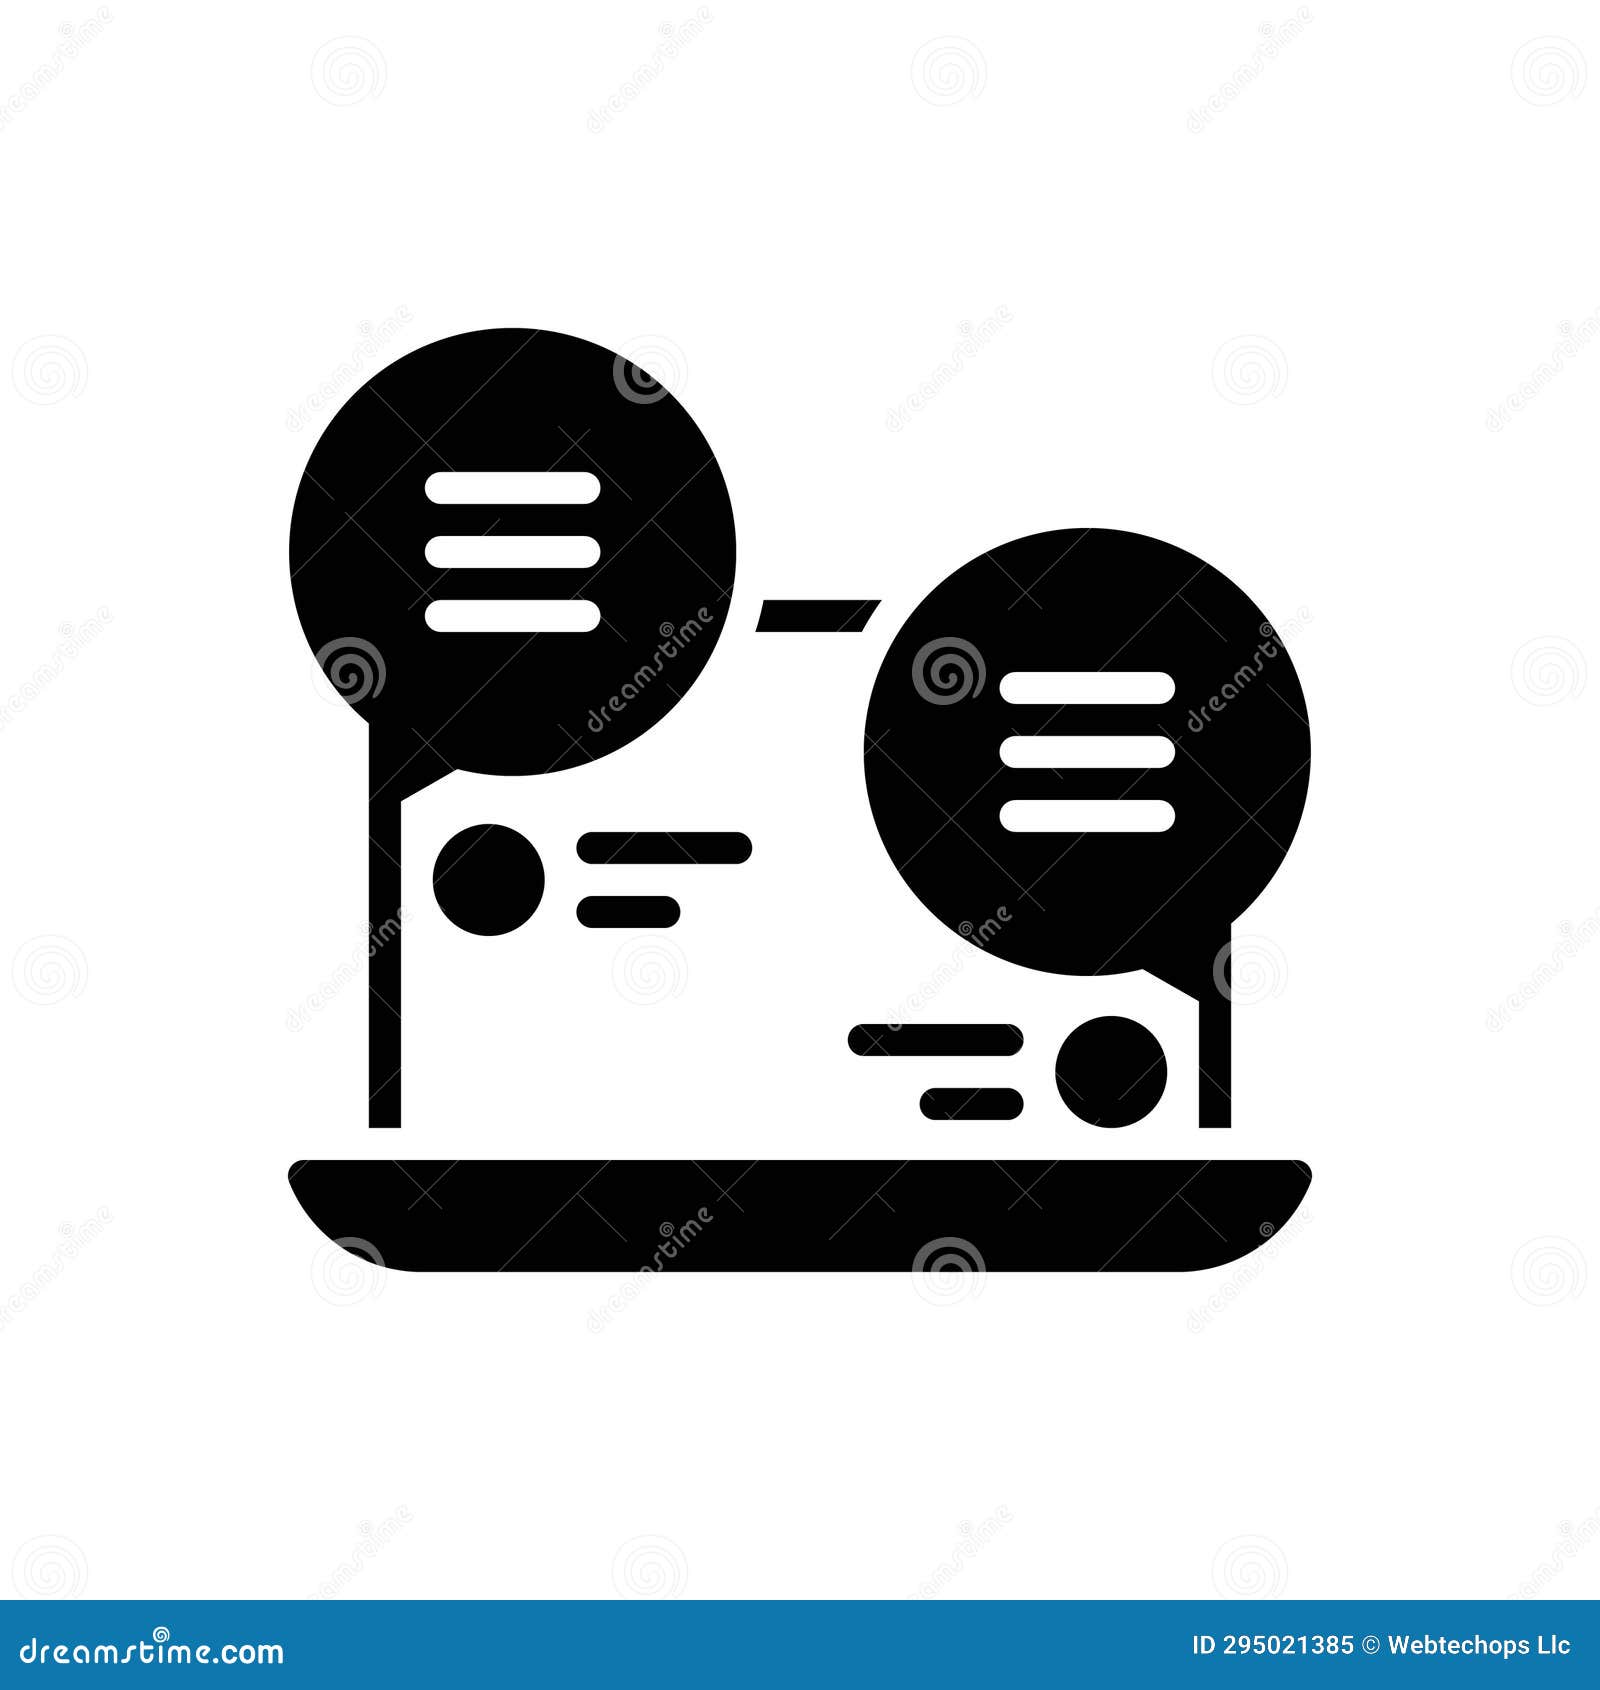 black solid icon for livechat, online and communication